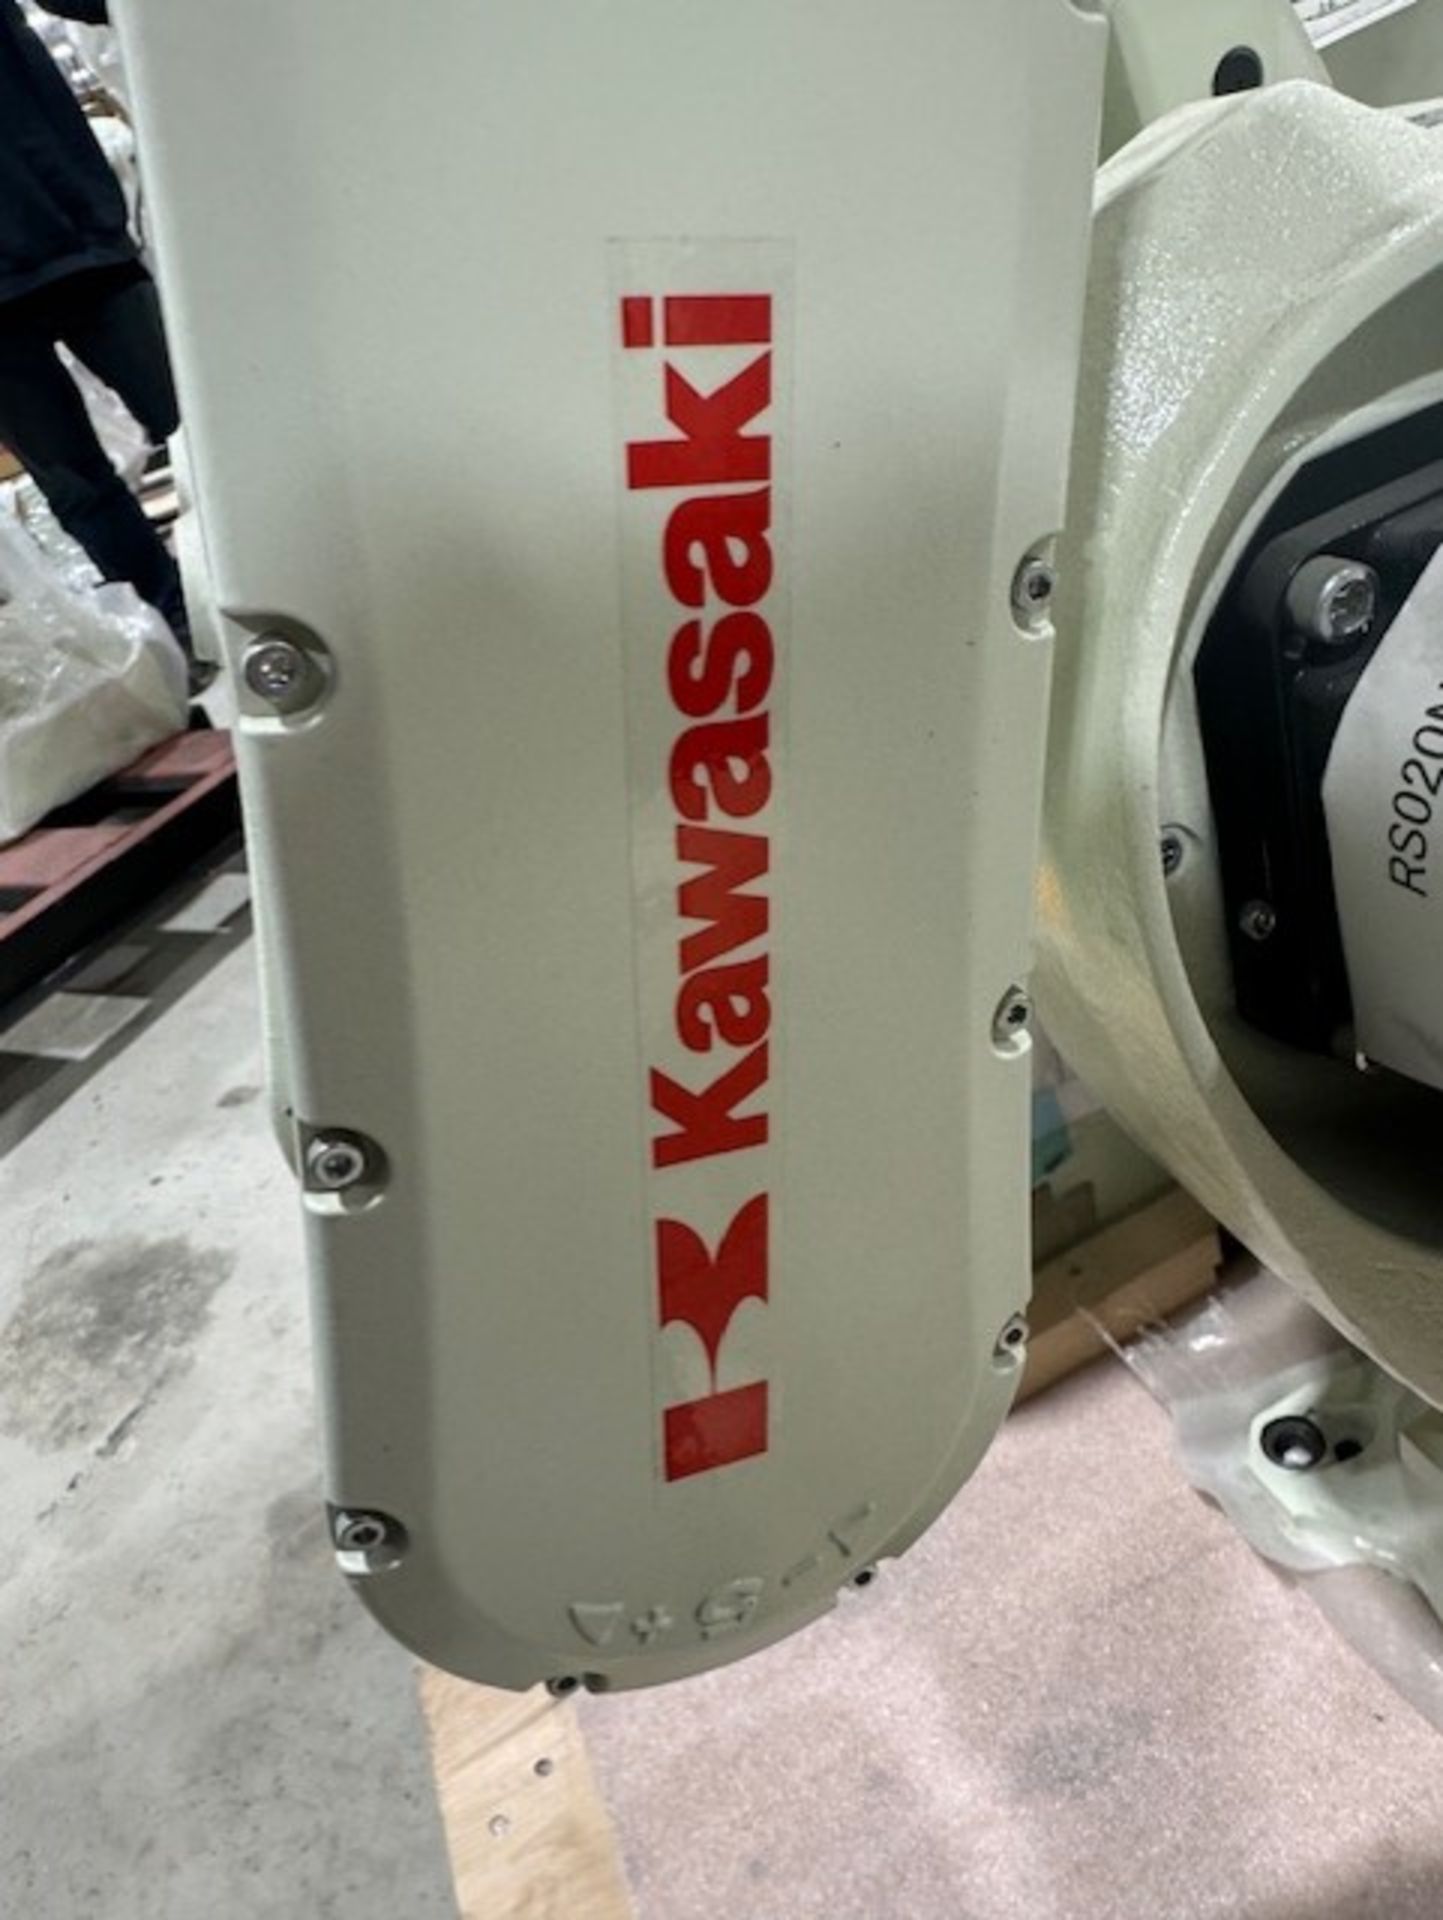 NEW KAWASAKI ROBOT MODEL RS020N, SN 4586, 20KG X 1725MM REACH WITH EO1 CONTROLS, CABLES & TEACH - Image 5 of 7